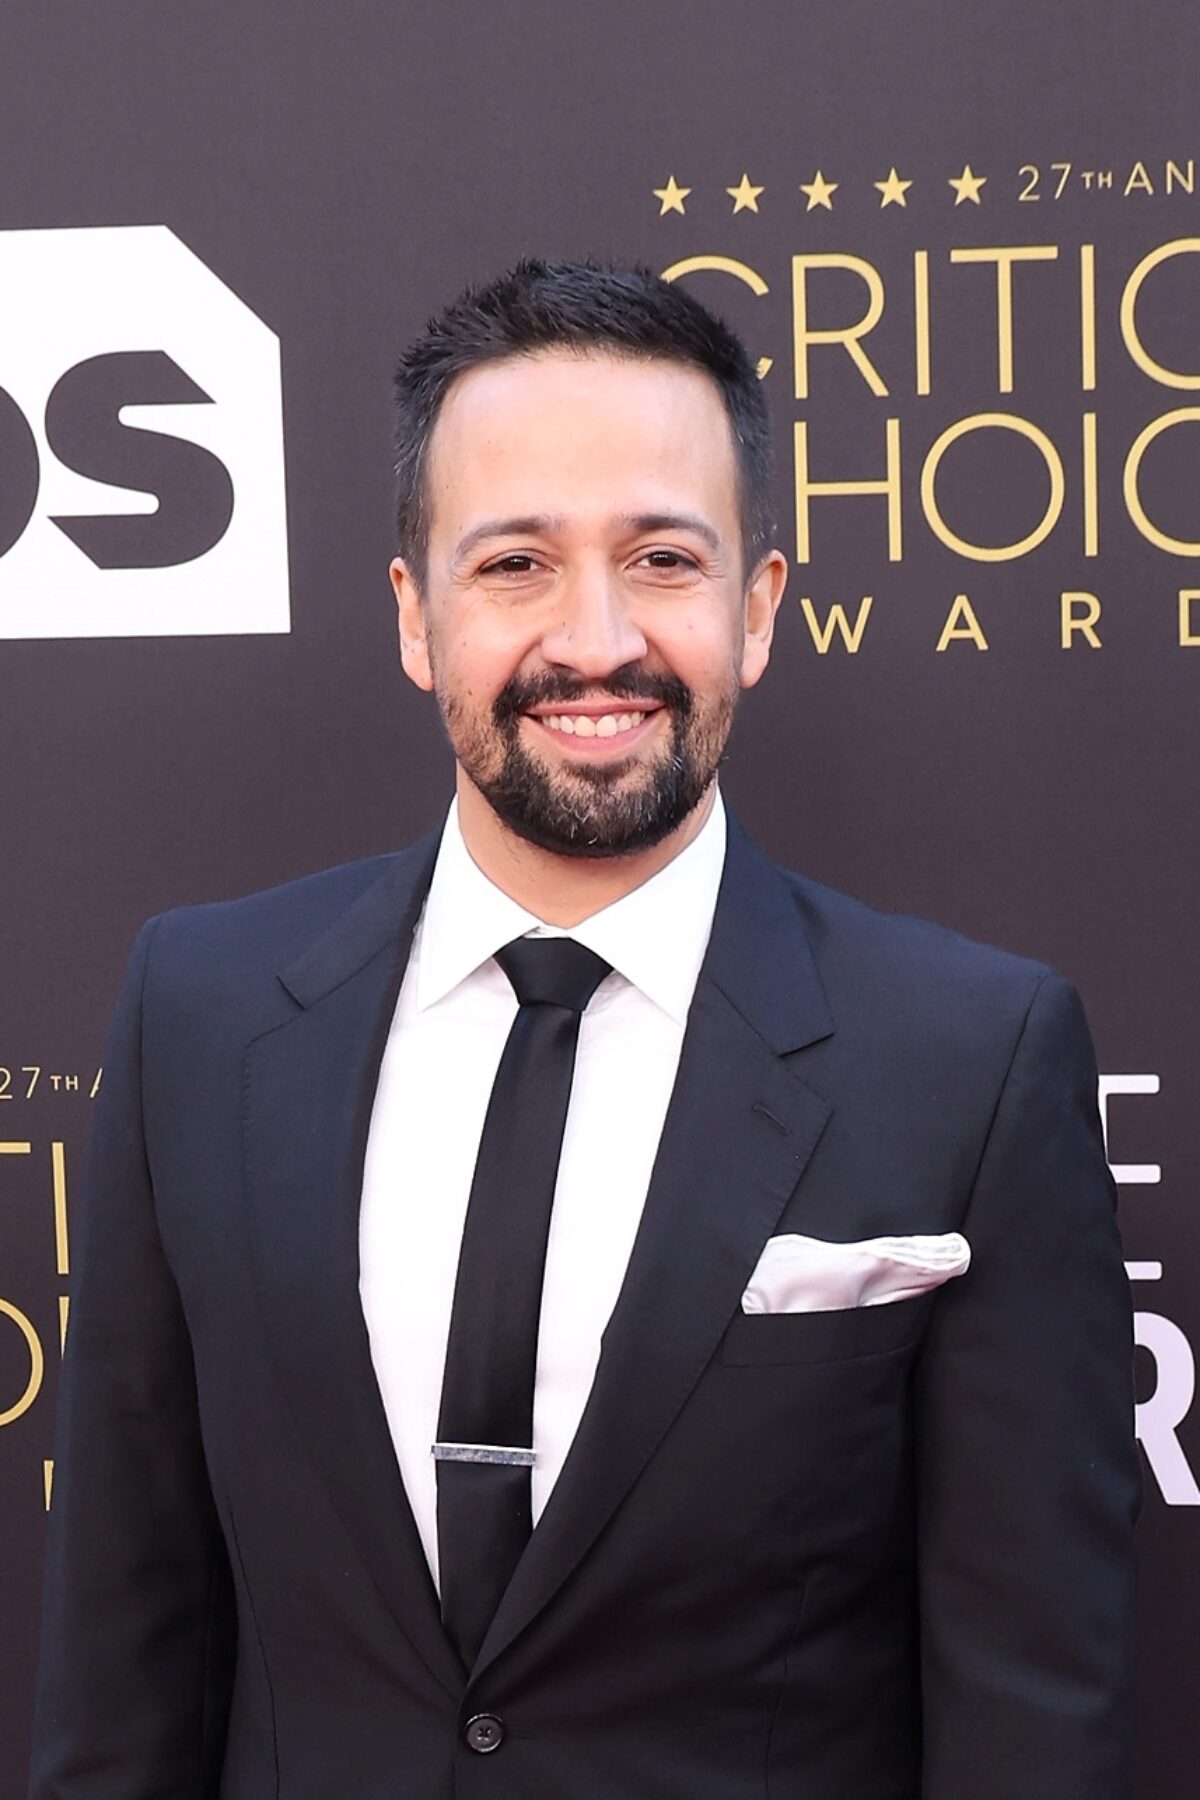 LOS ANGELES, CALIFORNIA - MARCH 13: Lin-Manuel Miranda attends the 27th Annual Critics Choice Awards at Fairmont Century Plaza on March 13, 2022 in Los Angeles, California. (Photo by Taylor Hill/FilmMagic)